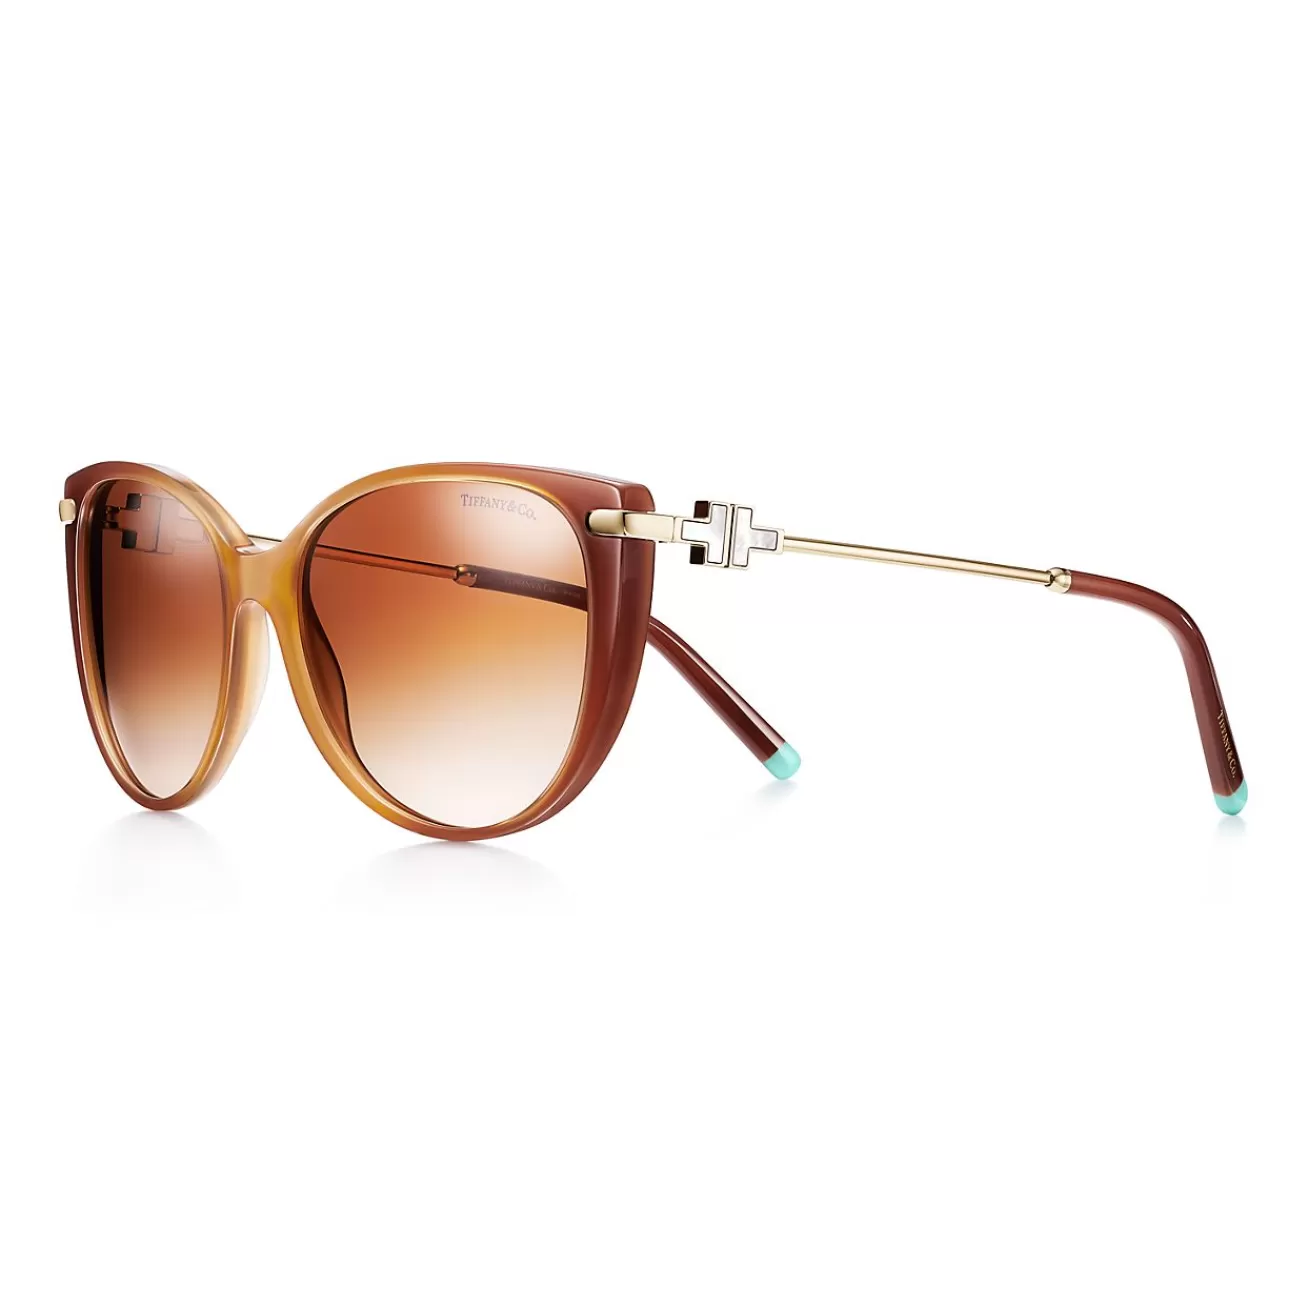 Tiffany & Co. Tiffany T Cat Eye Sunglasses in Camel Acetate with Mother-of-pearl | ^ Tiffany T | Sunglasses